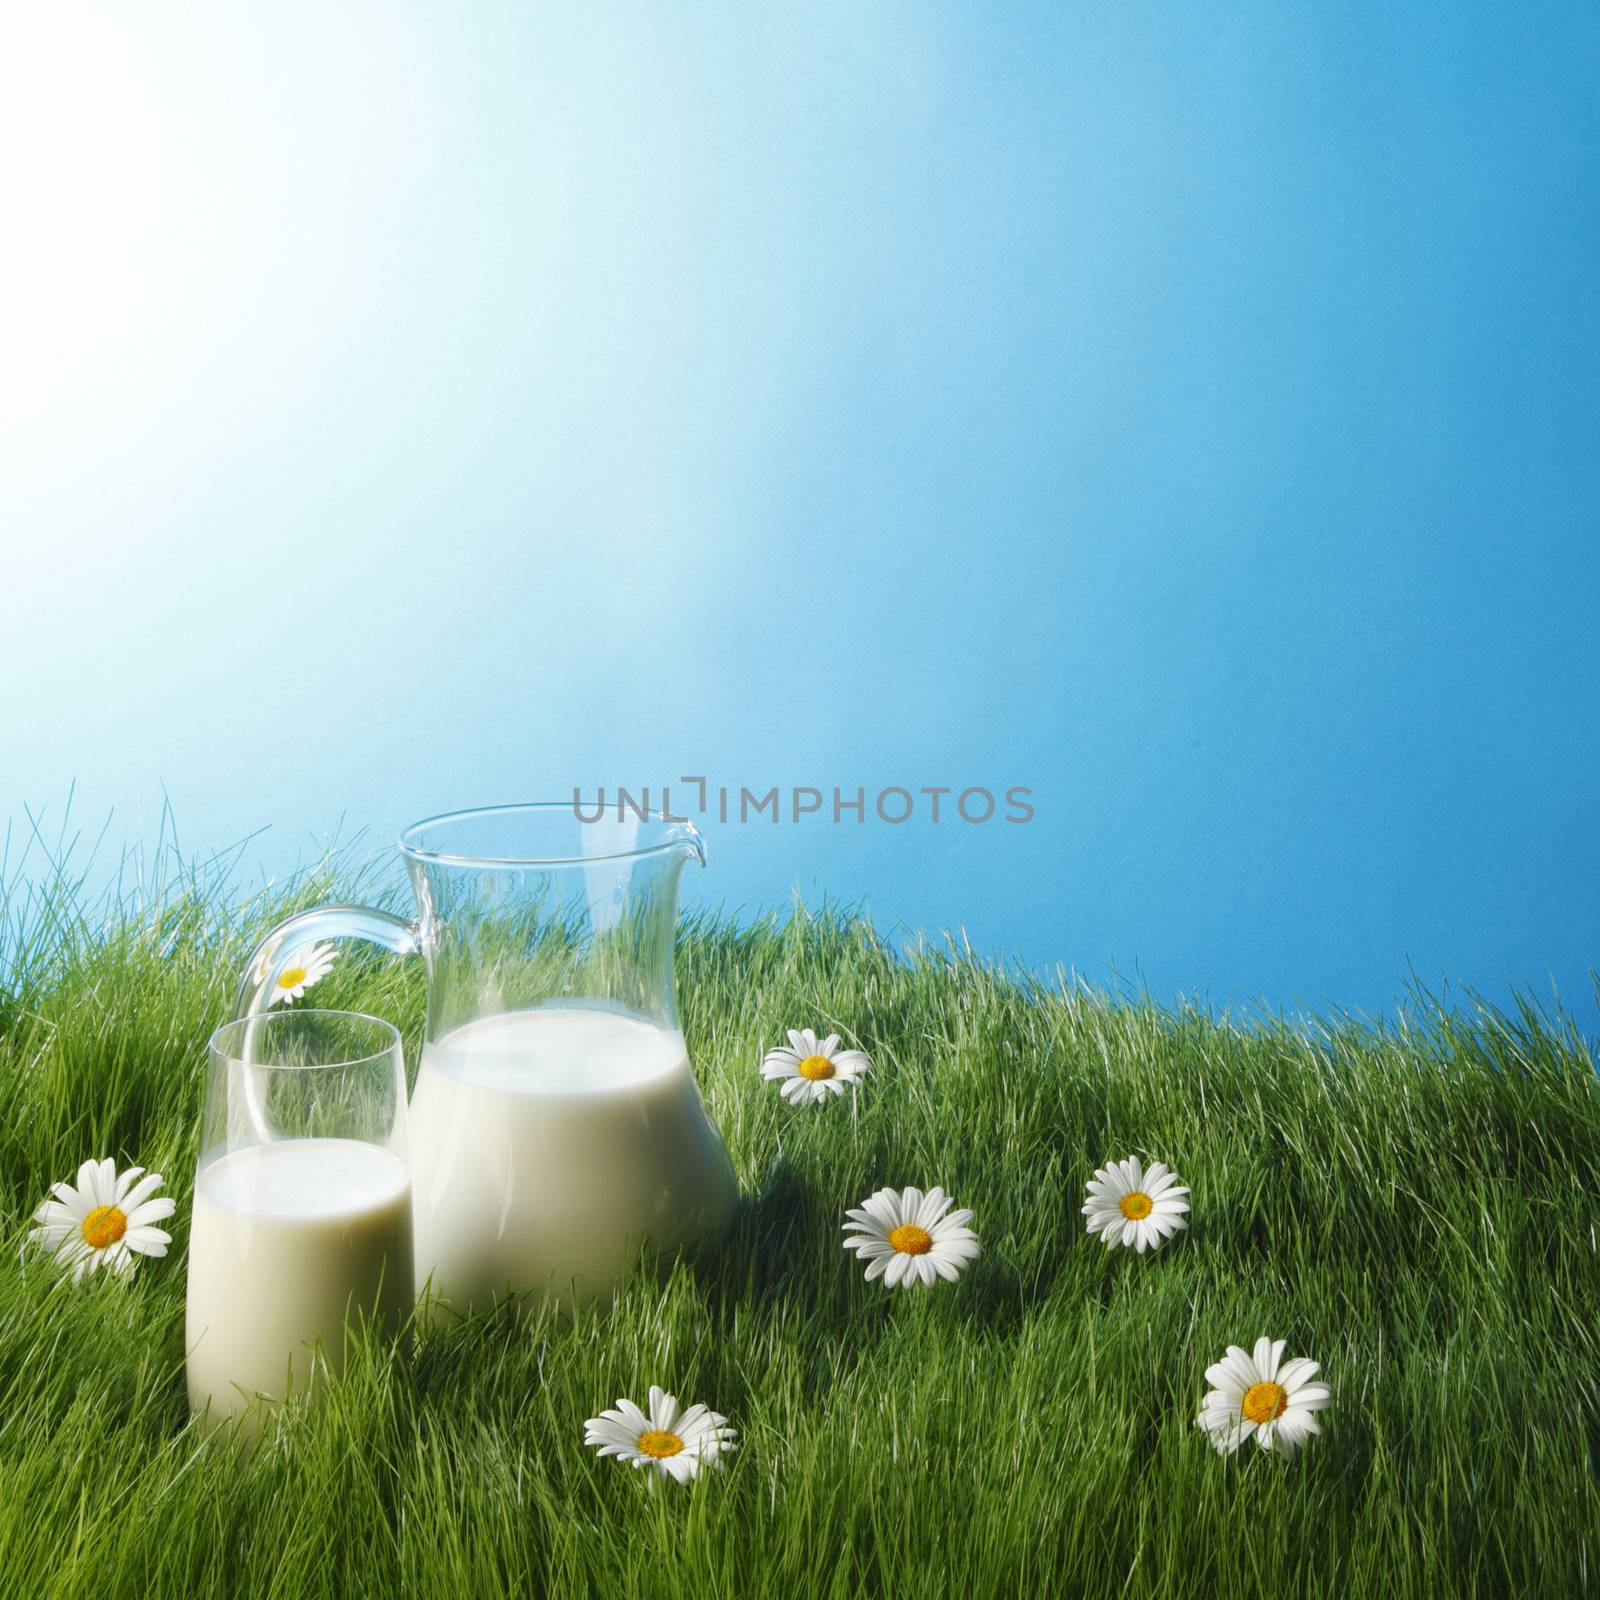 Milk jug and glass on fresh green grass with chamomiles